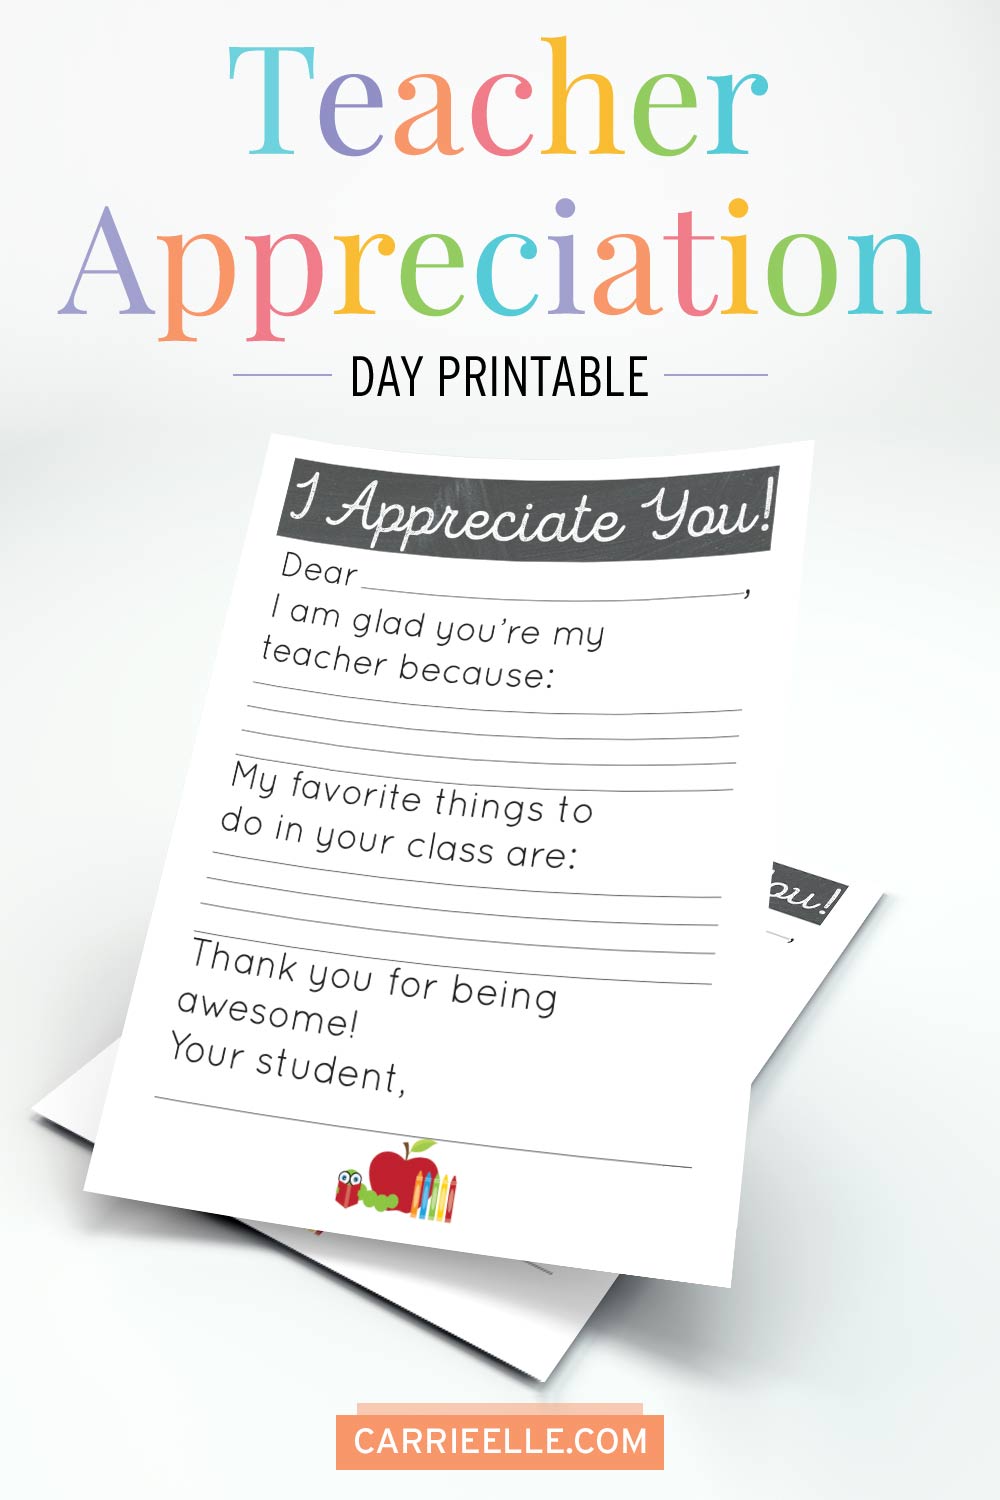 Teacher Appreciation Day Printable Letter from Kids CarrieElle.com